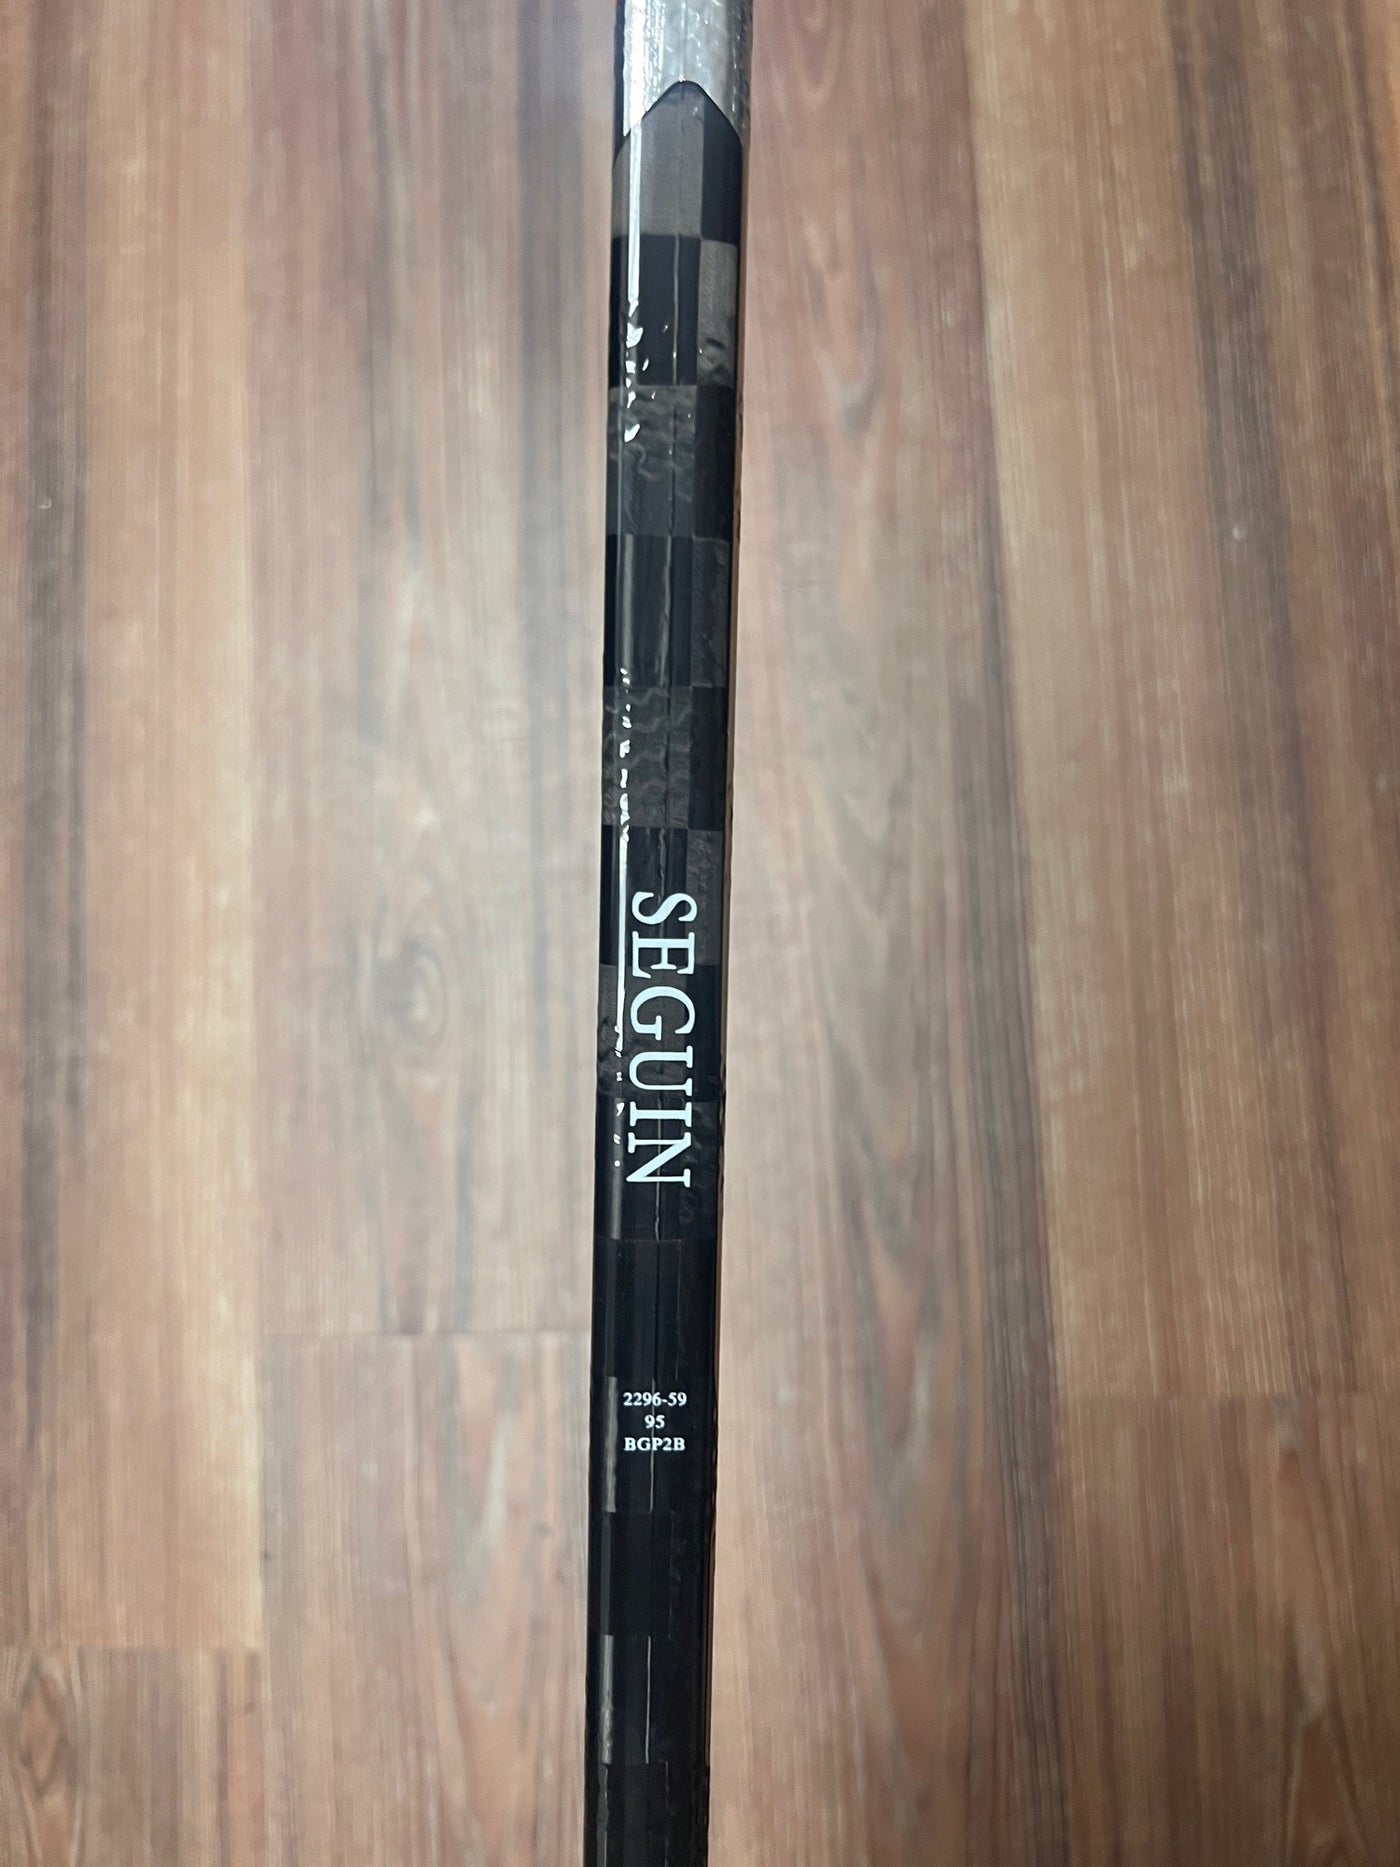 SEGUIN NEW BAUER TEAM ISSUED STICK - View of name on stick